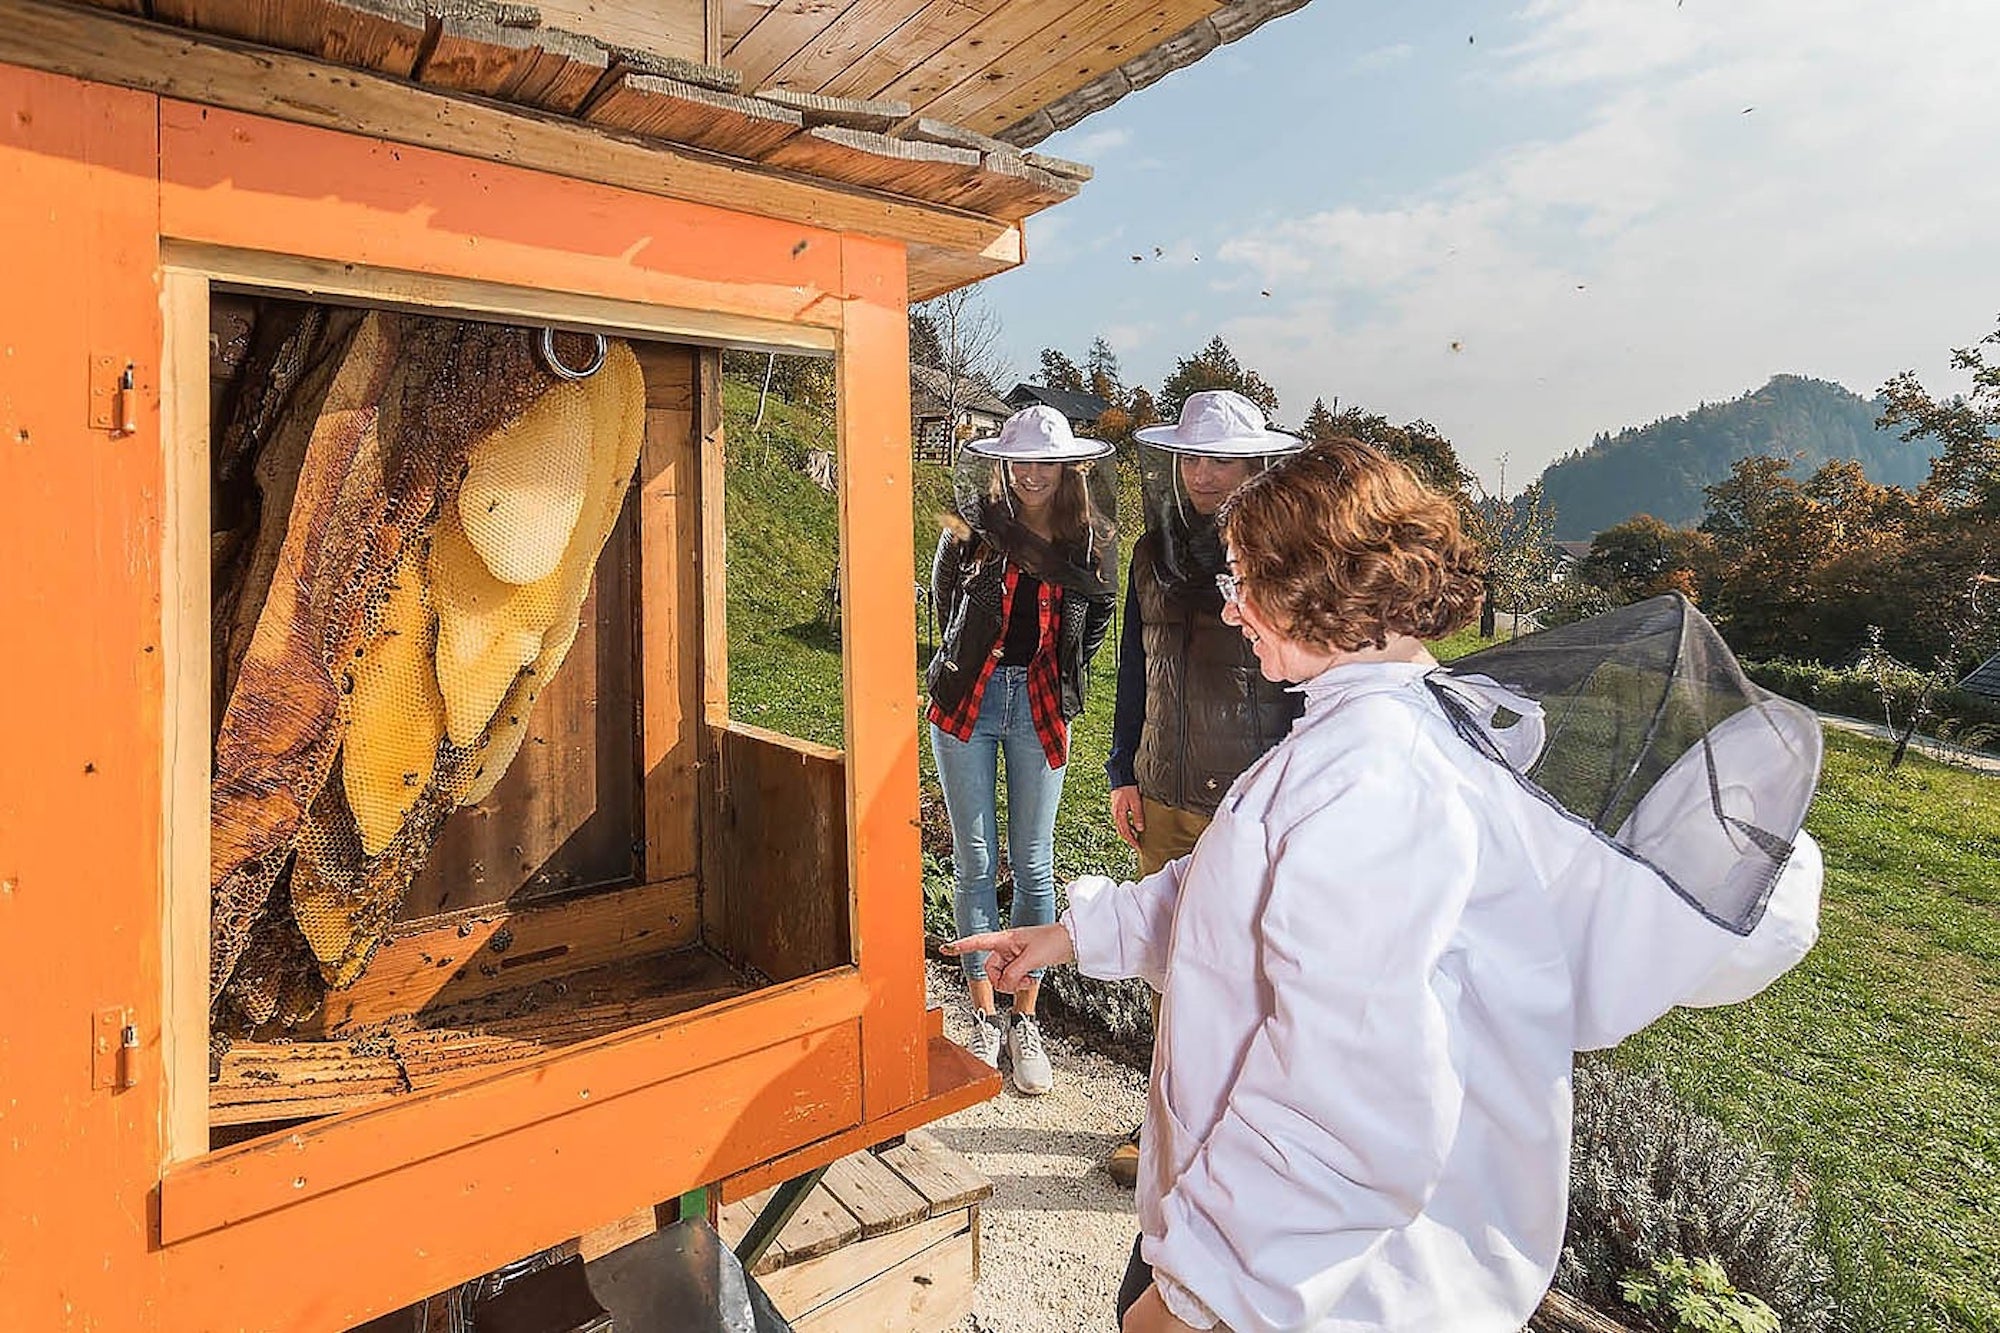 Beekeper in suit opening a wood and glass door to a hive in pastoral Slovenia